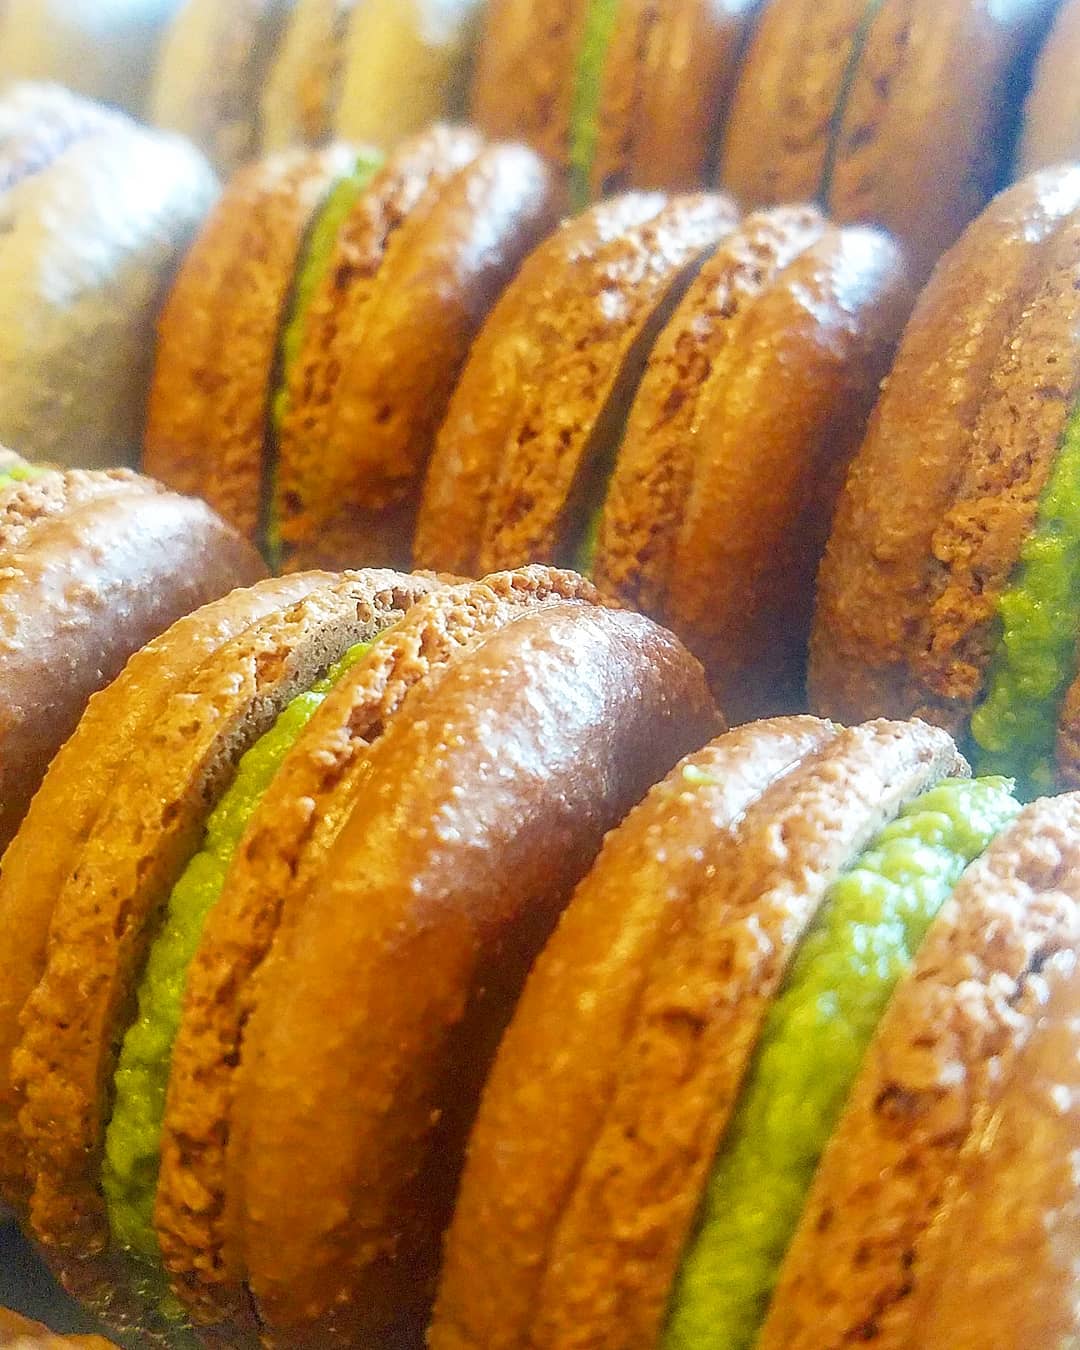 Chocolate Matcha. Superfood Macaron.
🐦
We thought we would pop this beauty in the case for St. Patrick’s day…
🐦
This Macaron is made with a beautiful natural Matcha green tea powder and has a wonderful nuttiness coupled with the added complexity of chocolate
🐦
This flavor is absolutely atypical for a macaron and borders almost on the savory
🐦
So come by and experience this beauty or order ahead at 405 430 5484
🐦
@bellekitchenokc #macaron #macarons #matcha #chocolate #food #foodie #foodporn #instafood #instagood #f52grams #okc #cookingchannel #keepitlocalok #yummy #yes #superfood #okcmoms #stpatricksday #beautiful #bellekitchen